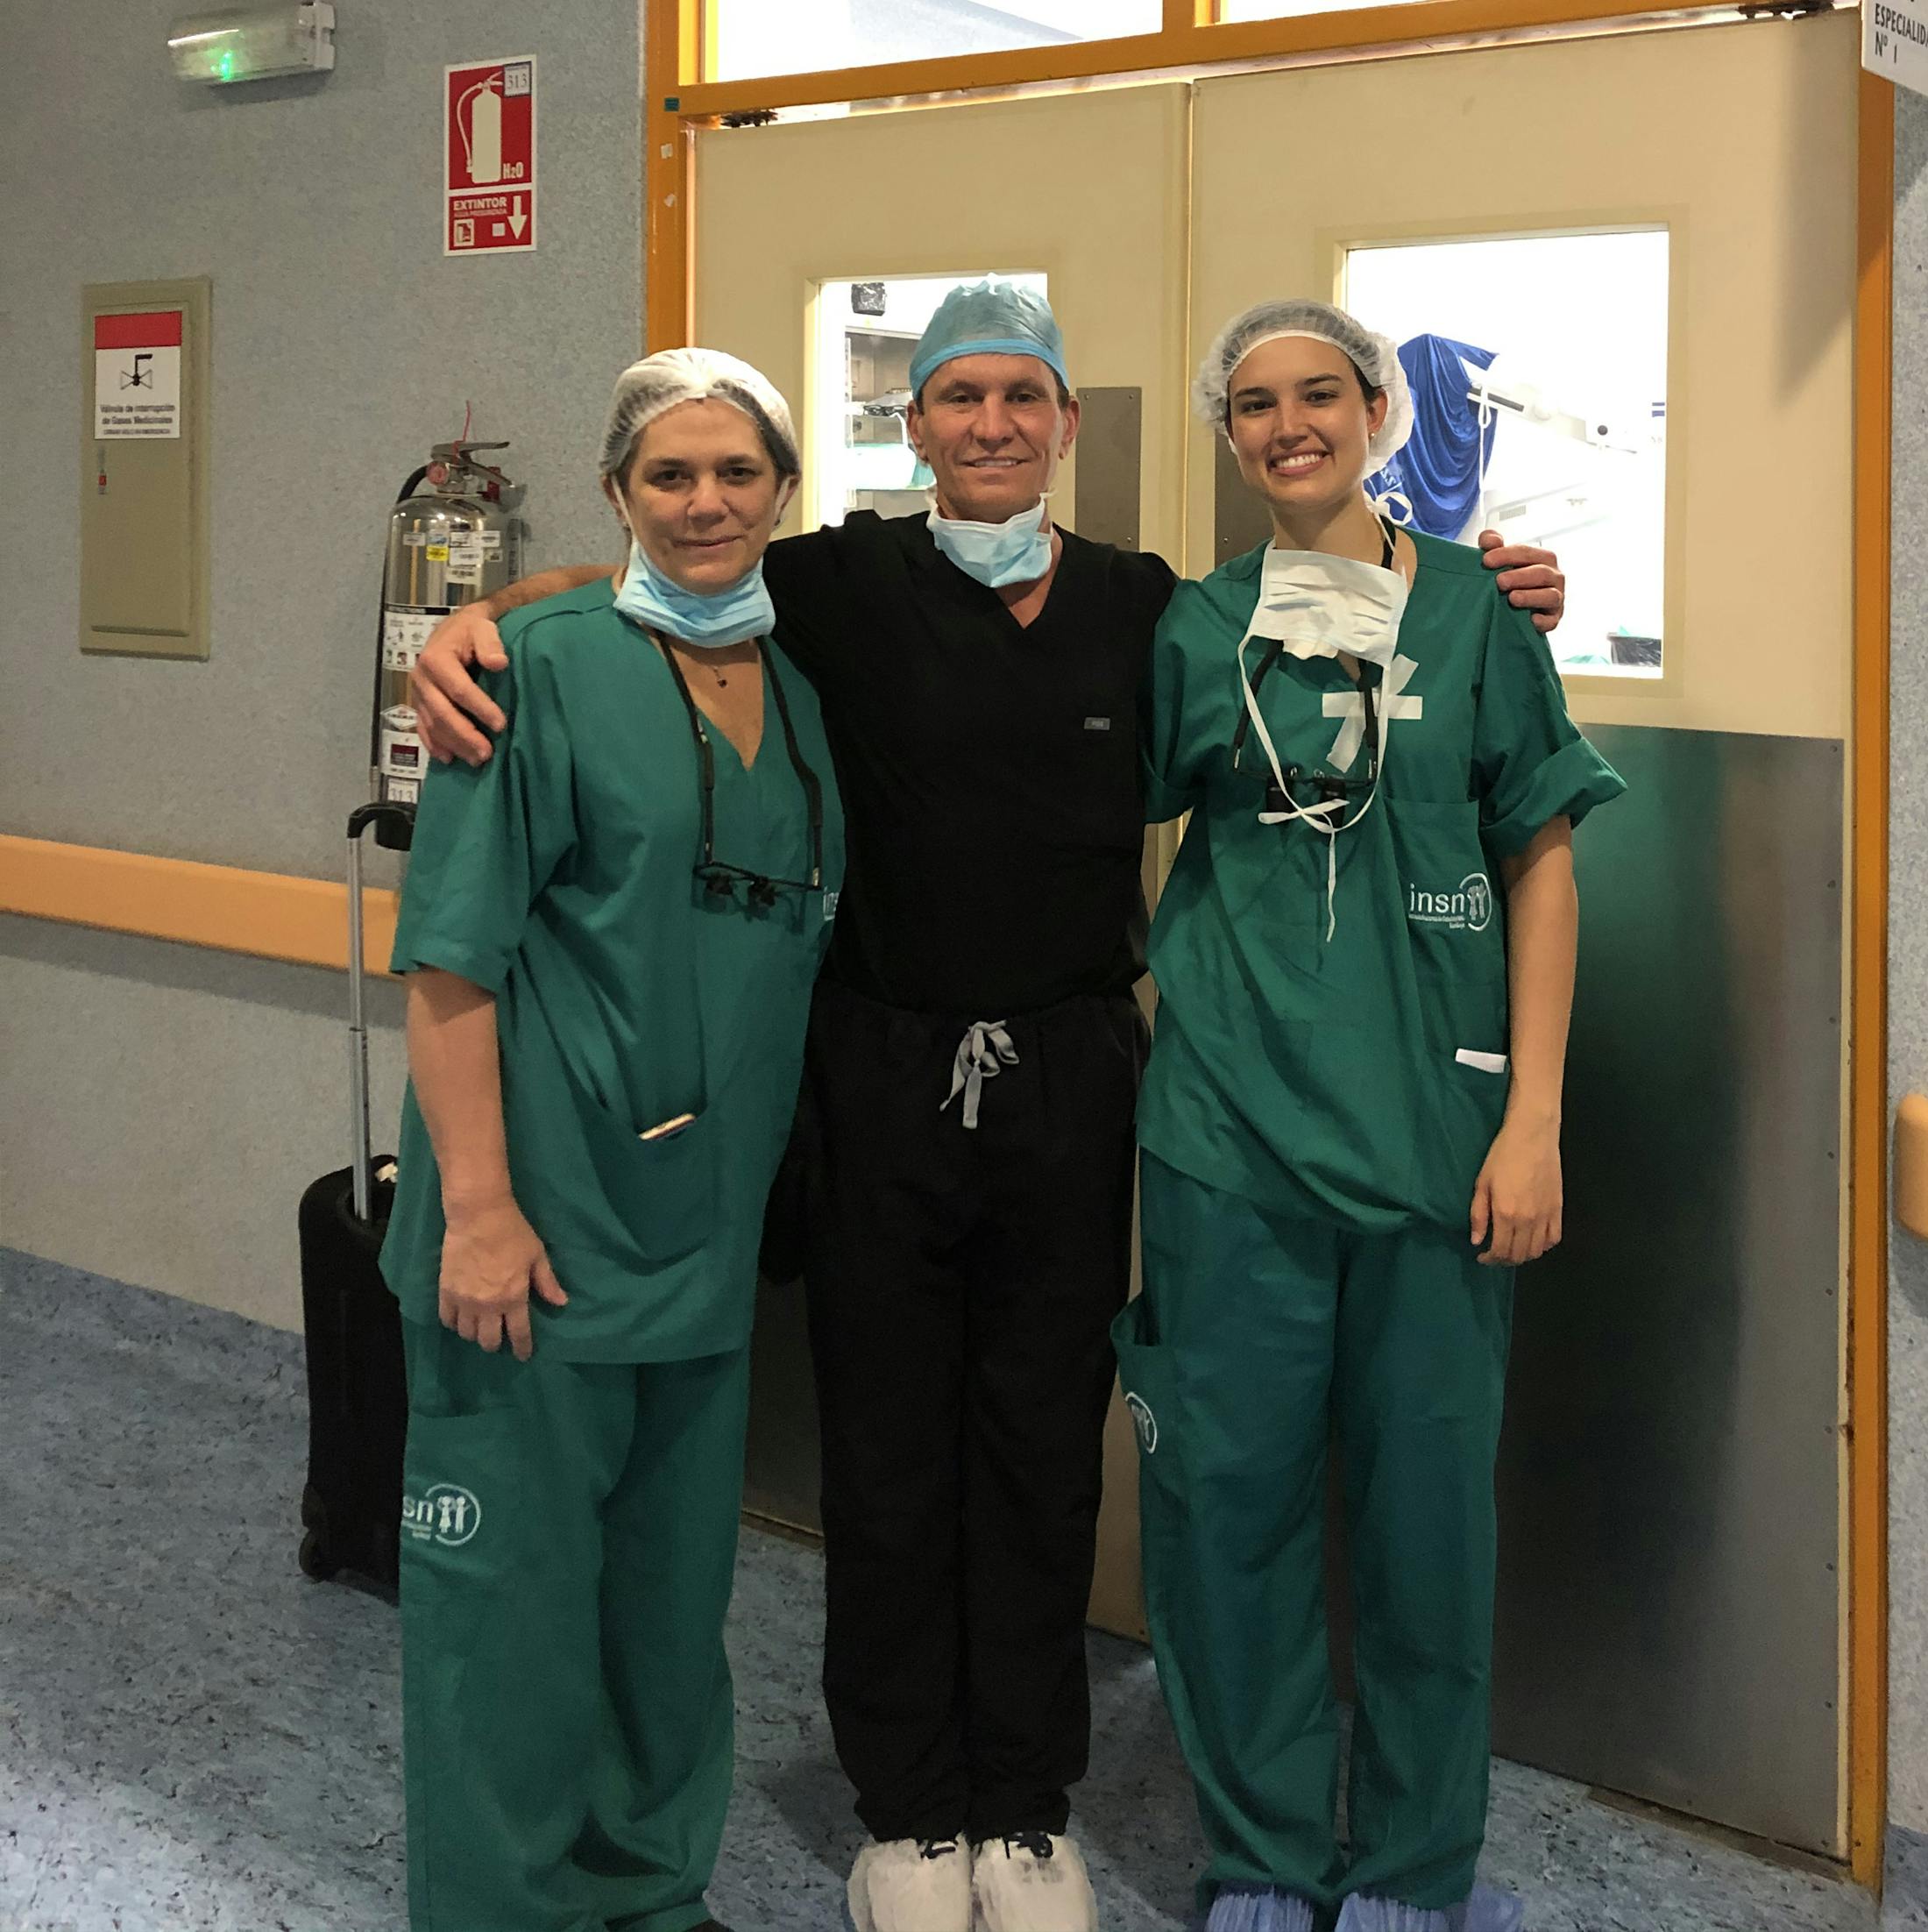 Dr. Shapiro Posing with Two Medical Professionals